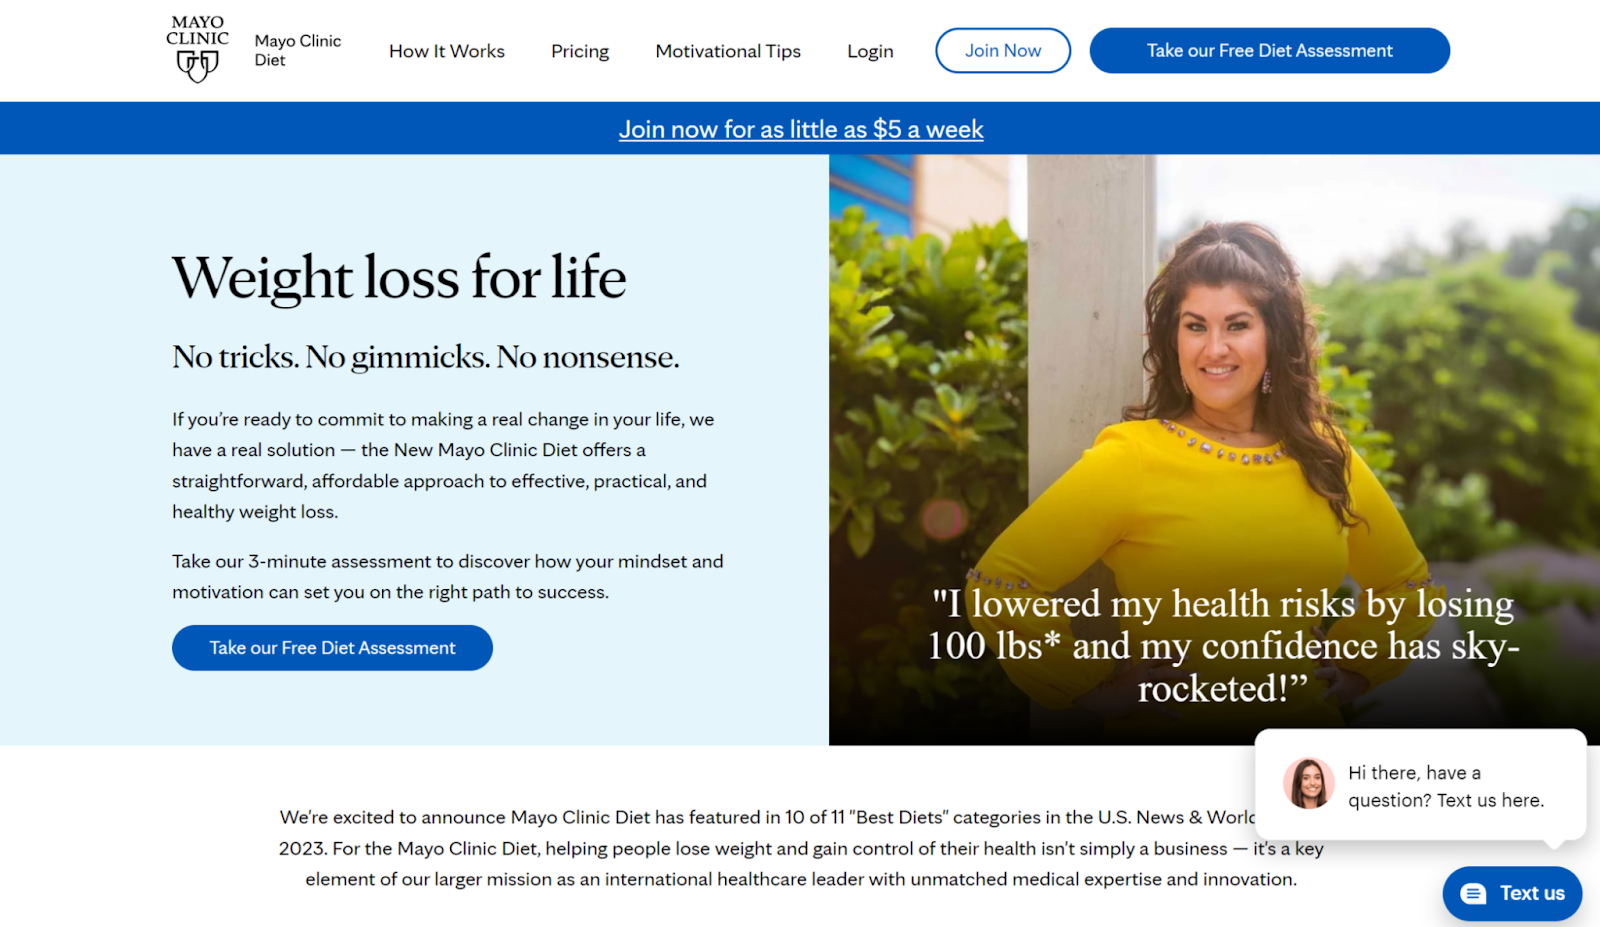 Mayo Clinic diet website home page